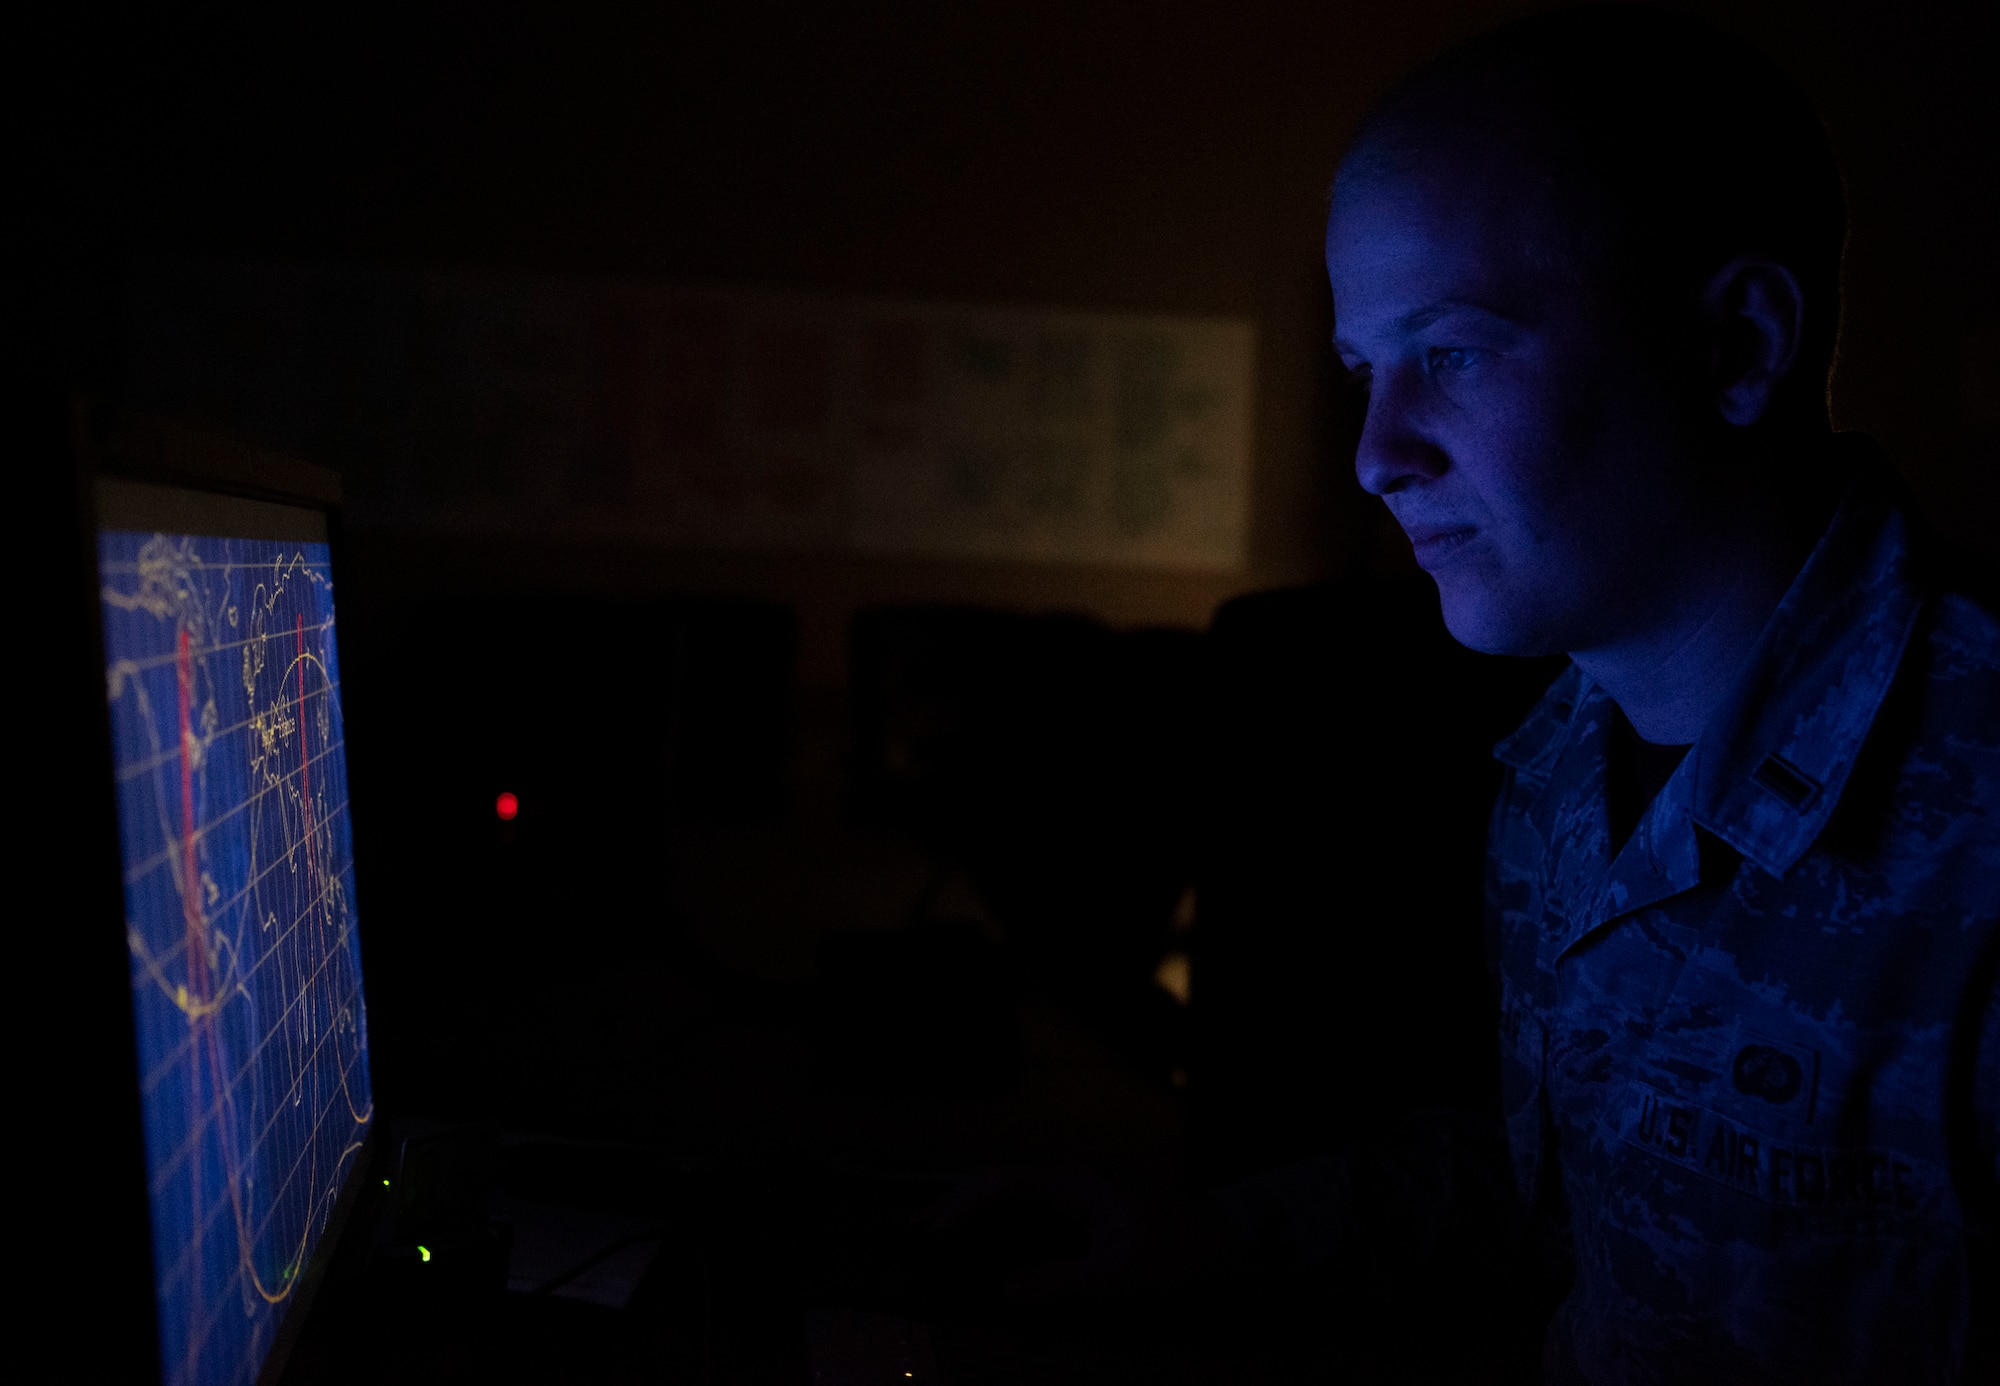 First Lt. Scott Podlogar, 4th Space Operations Squadron Enhanced Polar System contracting officer representative, observes an illustration of the Molniya orbit at Schriever Air Force Base, Colorado, Sept. 20, 2019. The Molniya orbit is a highly inclined orbit that enables satellites to provide better coverage for the northern part of the earth. (U.S. Air Force photo by Airman 1st Class Jonathan Whitely)